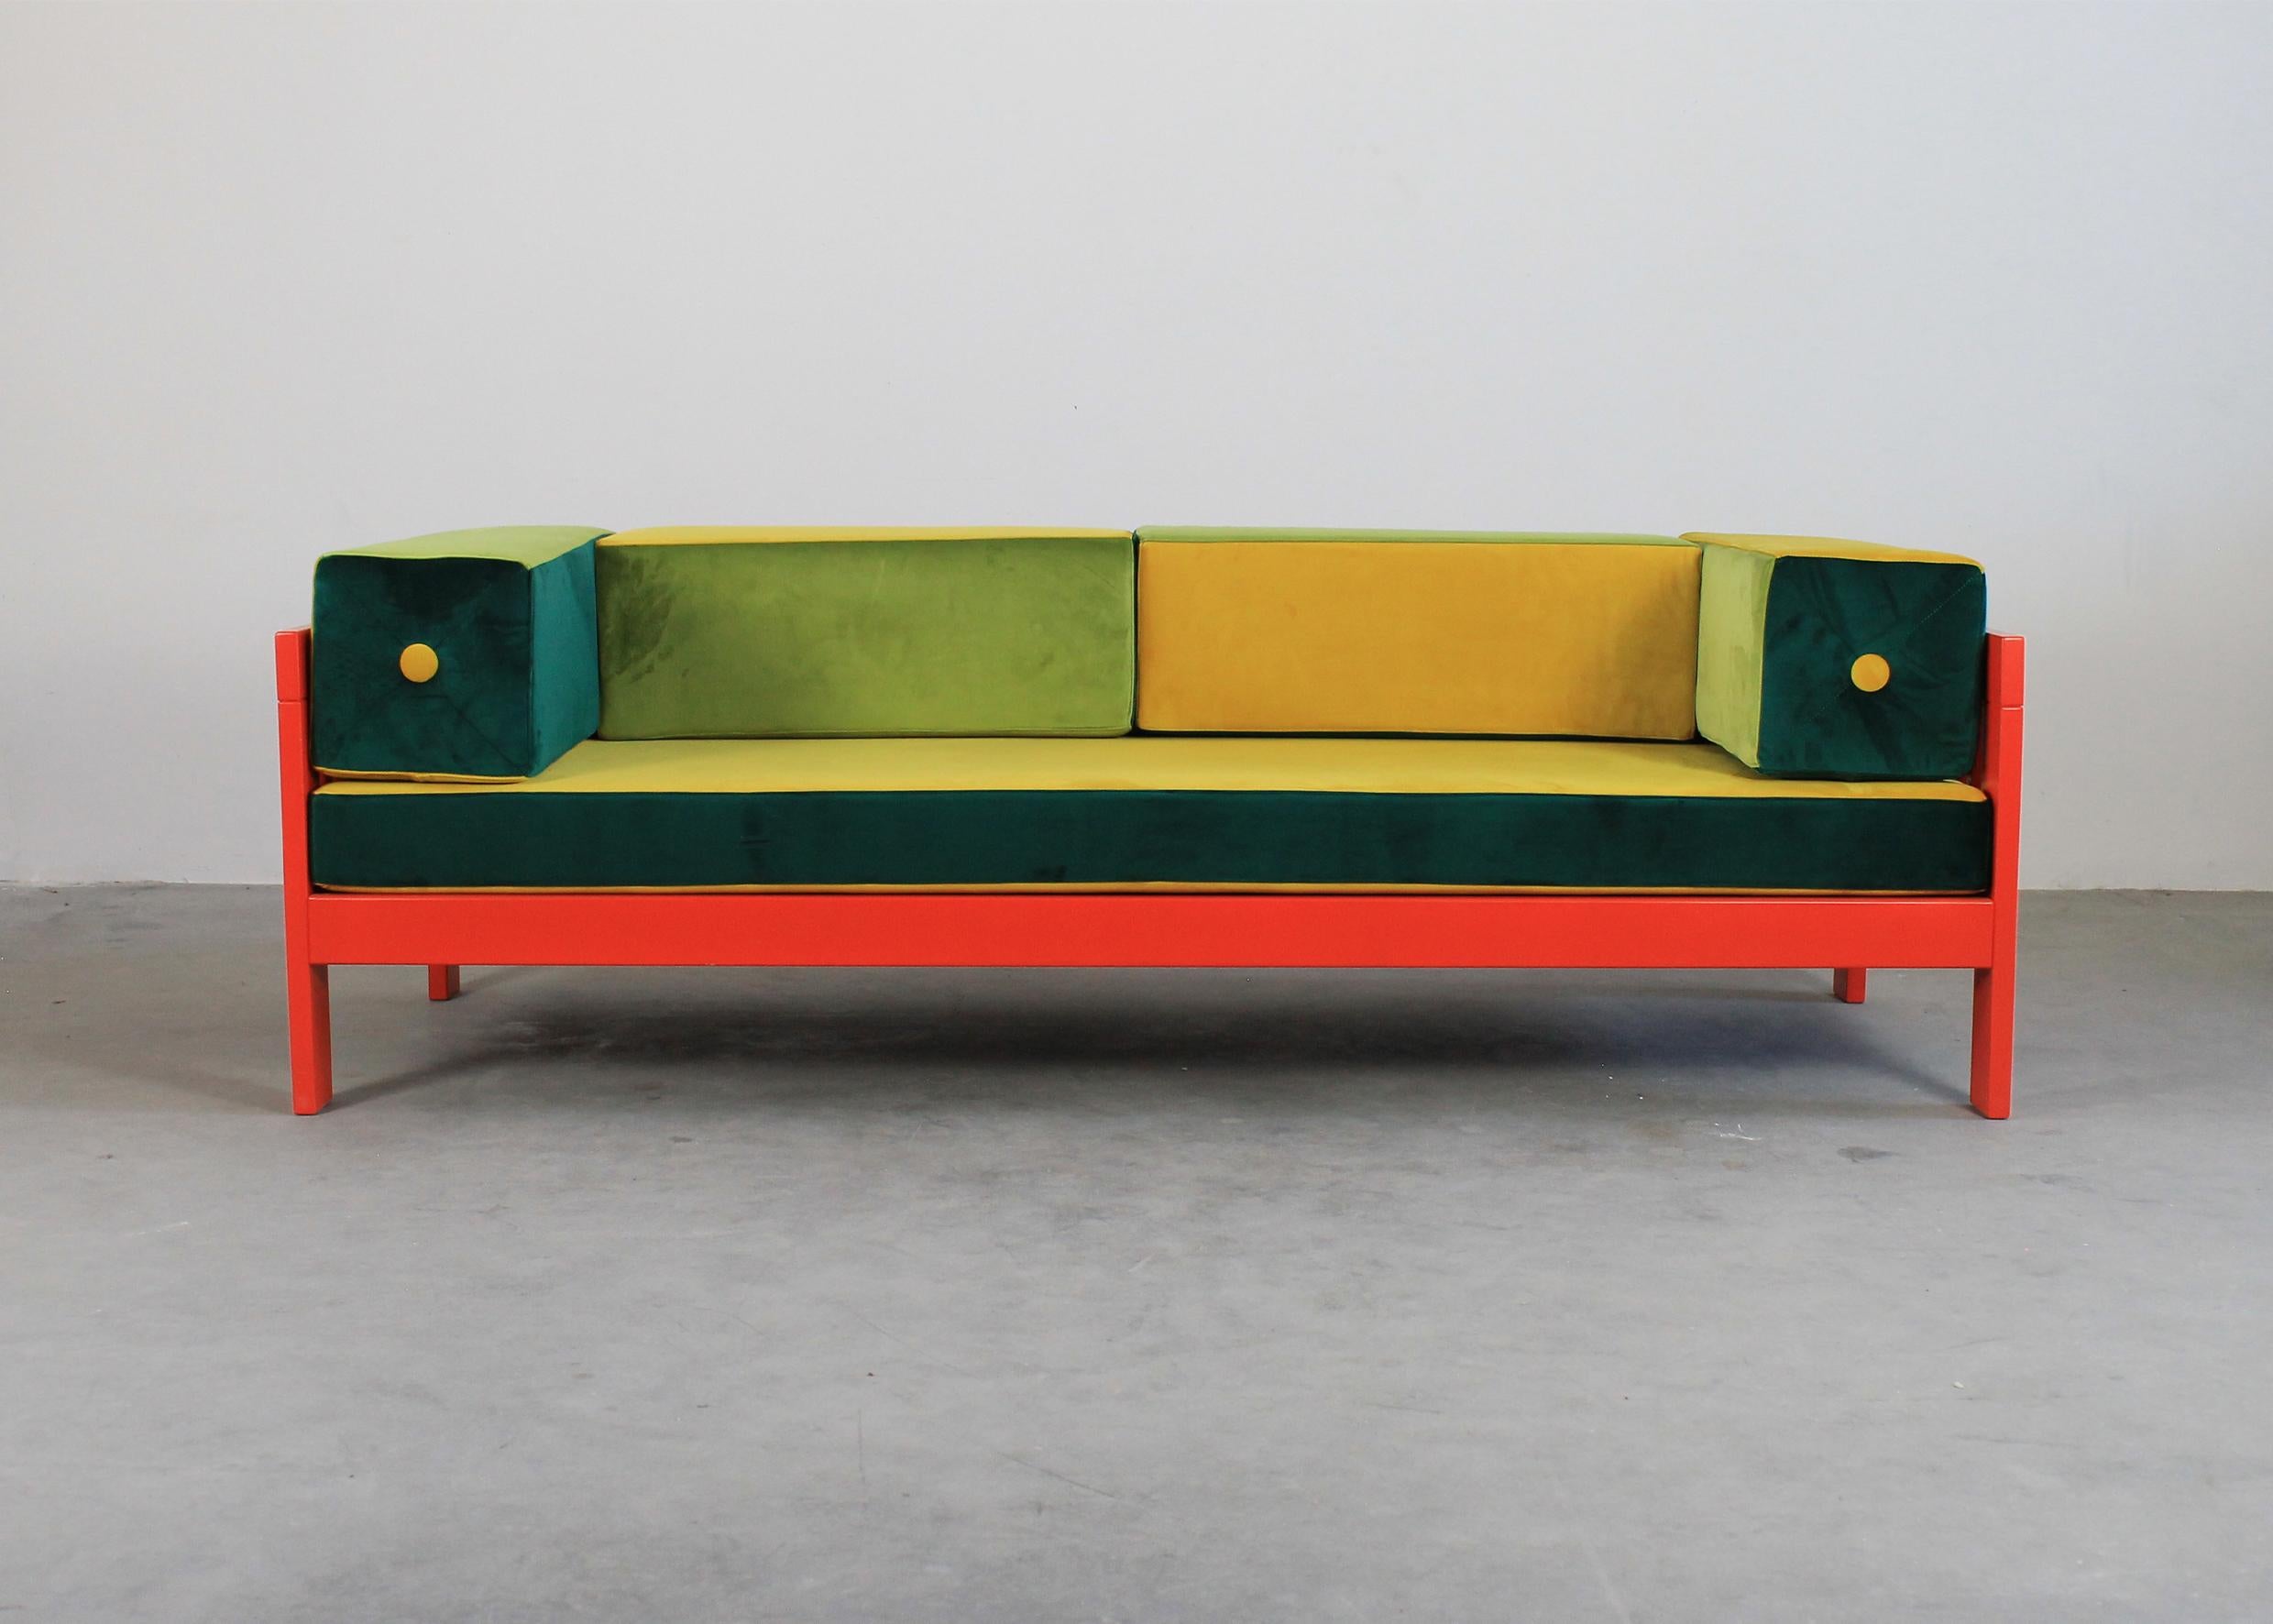 Two-seater Califfo sofa with a structure in a orange/red lacquered wood seat and back are structured by cushions upholstered with velvet fabric in a mixed shades of yellow and greens which perfectly contrast with the bright color of the sofa frame.